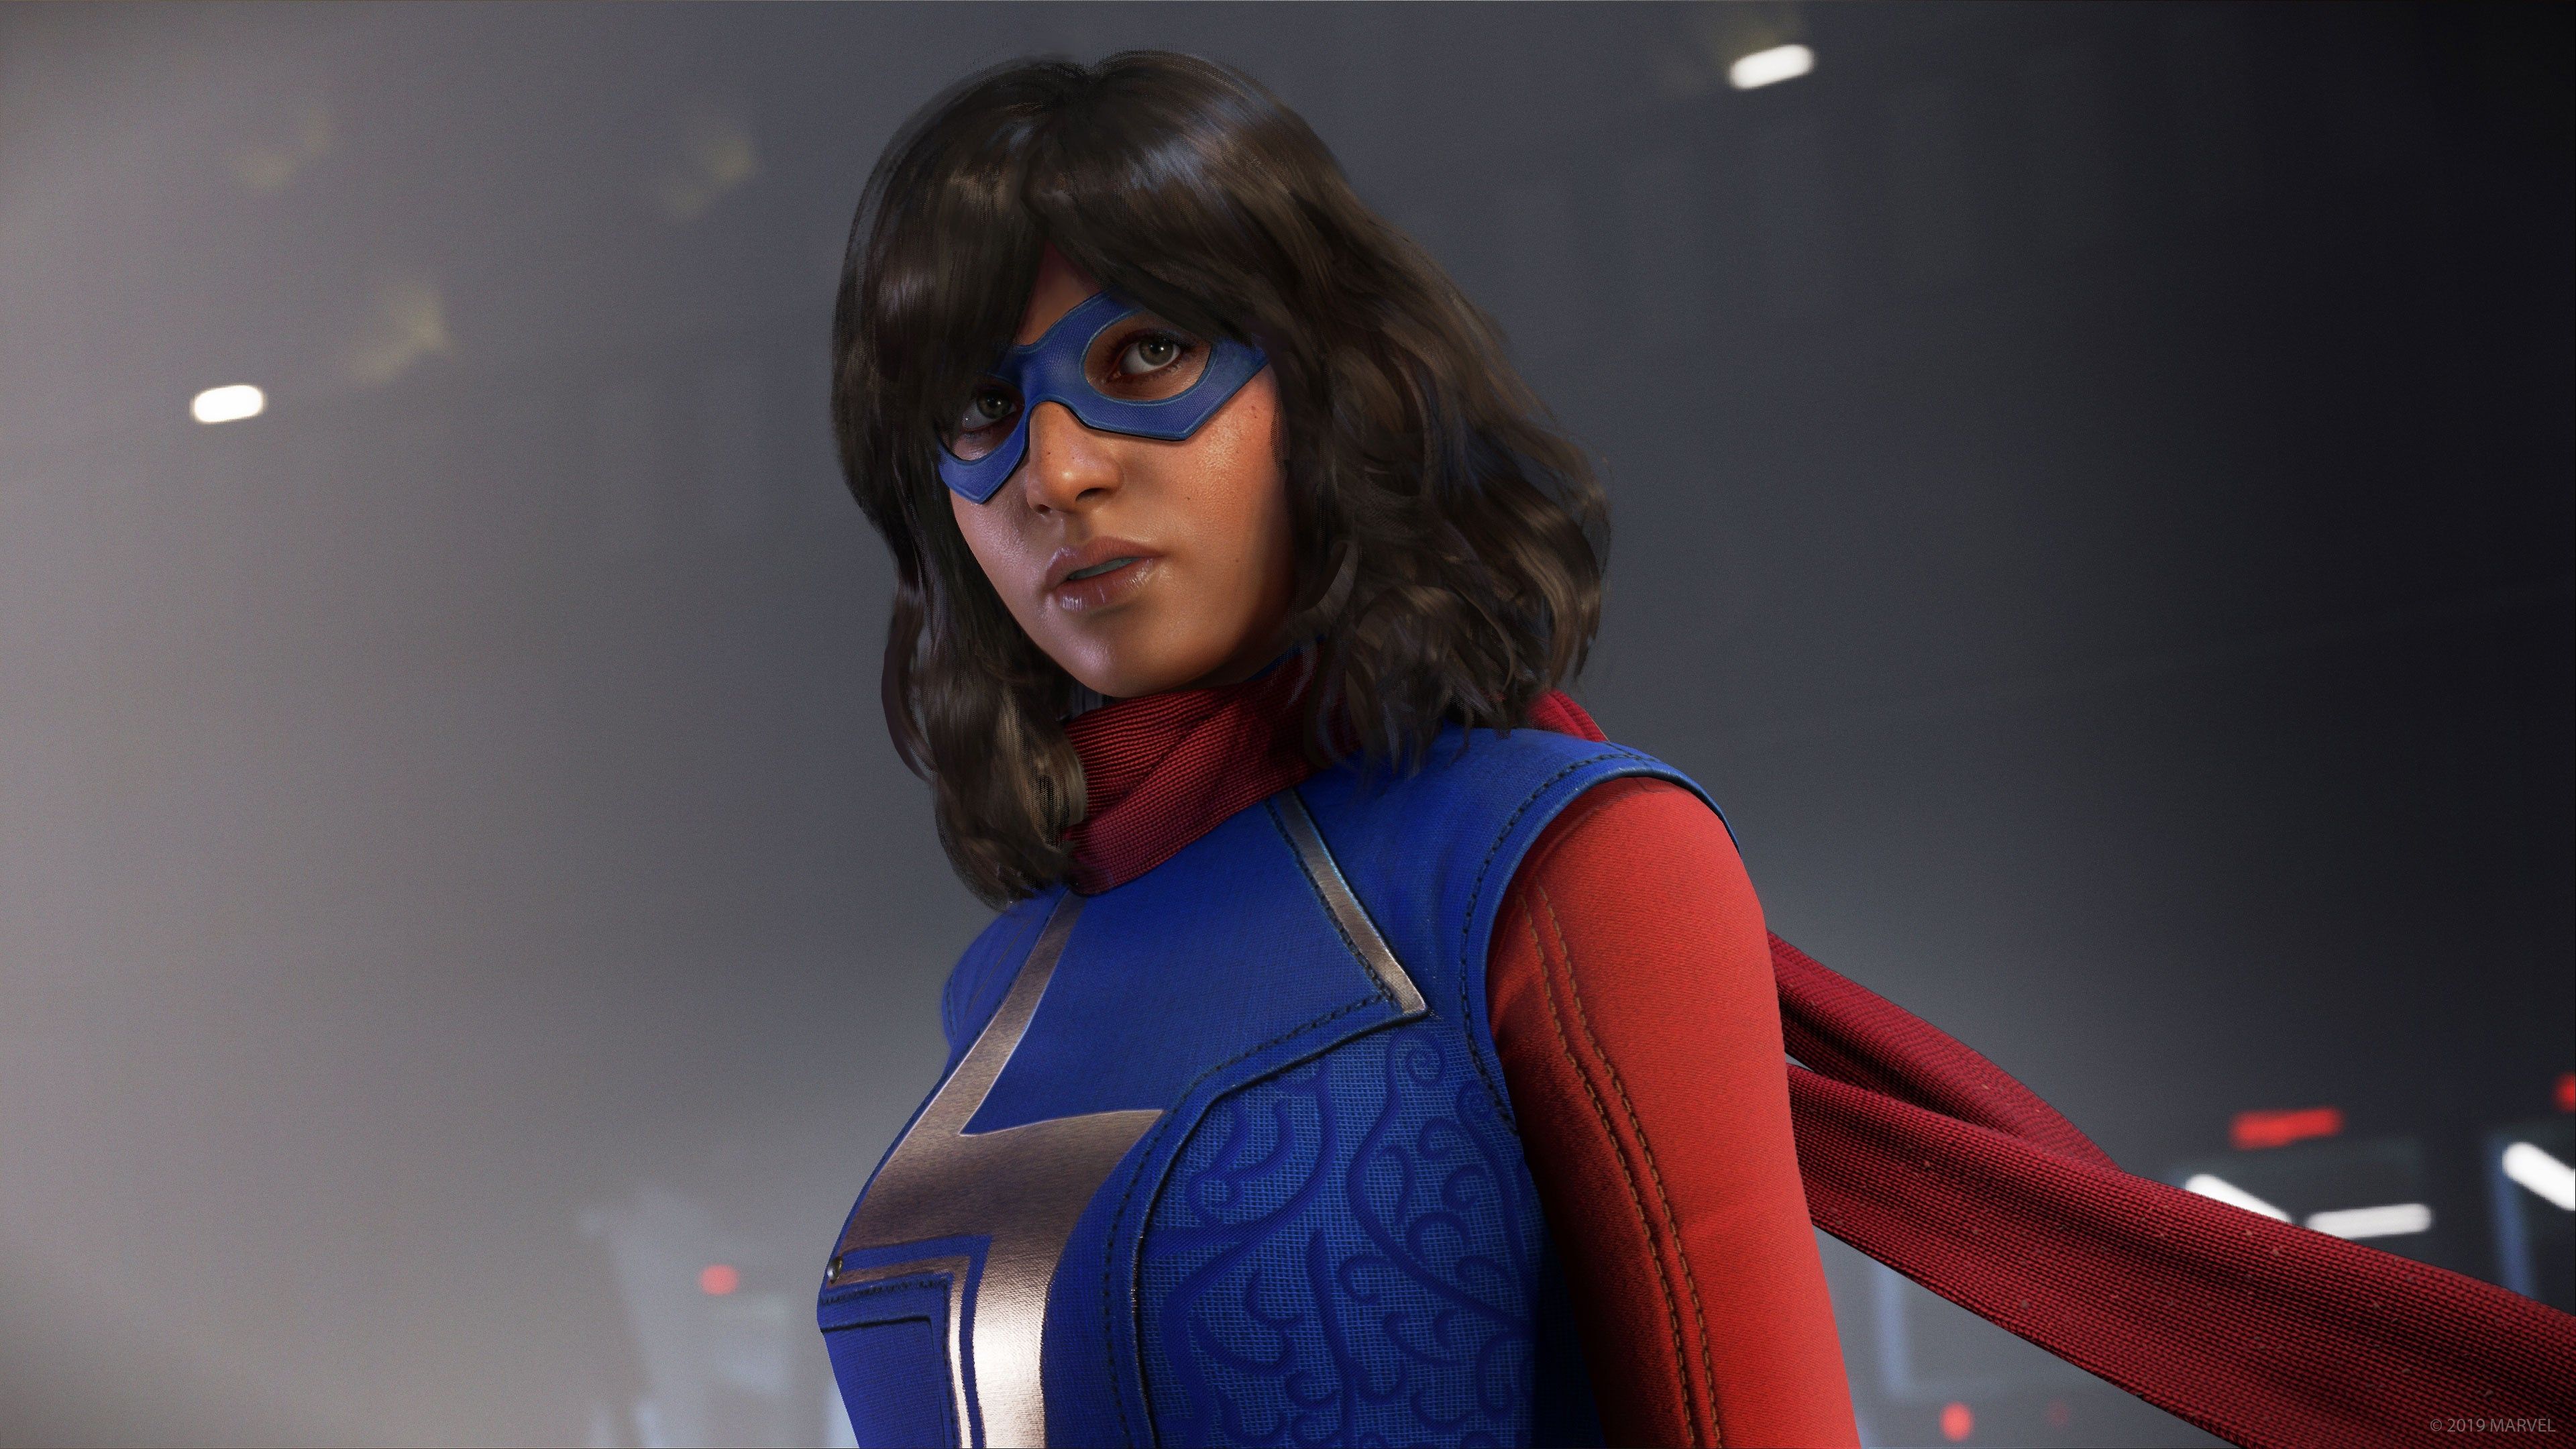 Ms Marvel in Avengers Game Wallpaper, HD Games 4K Wallpaper, Image, Photo and Background